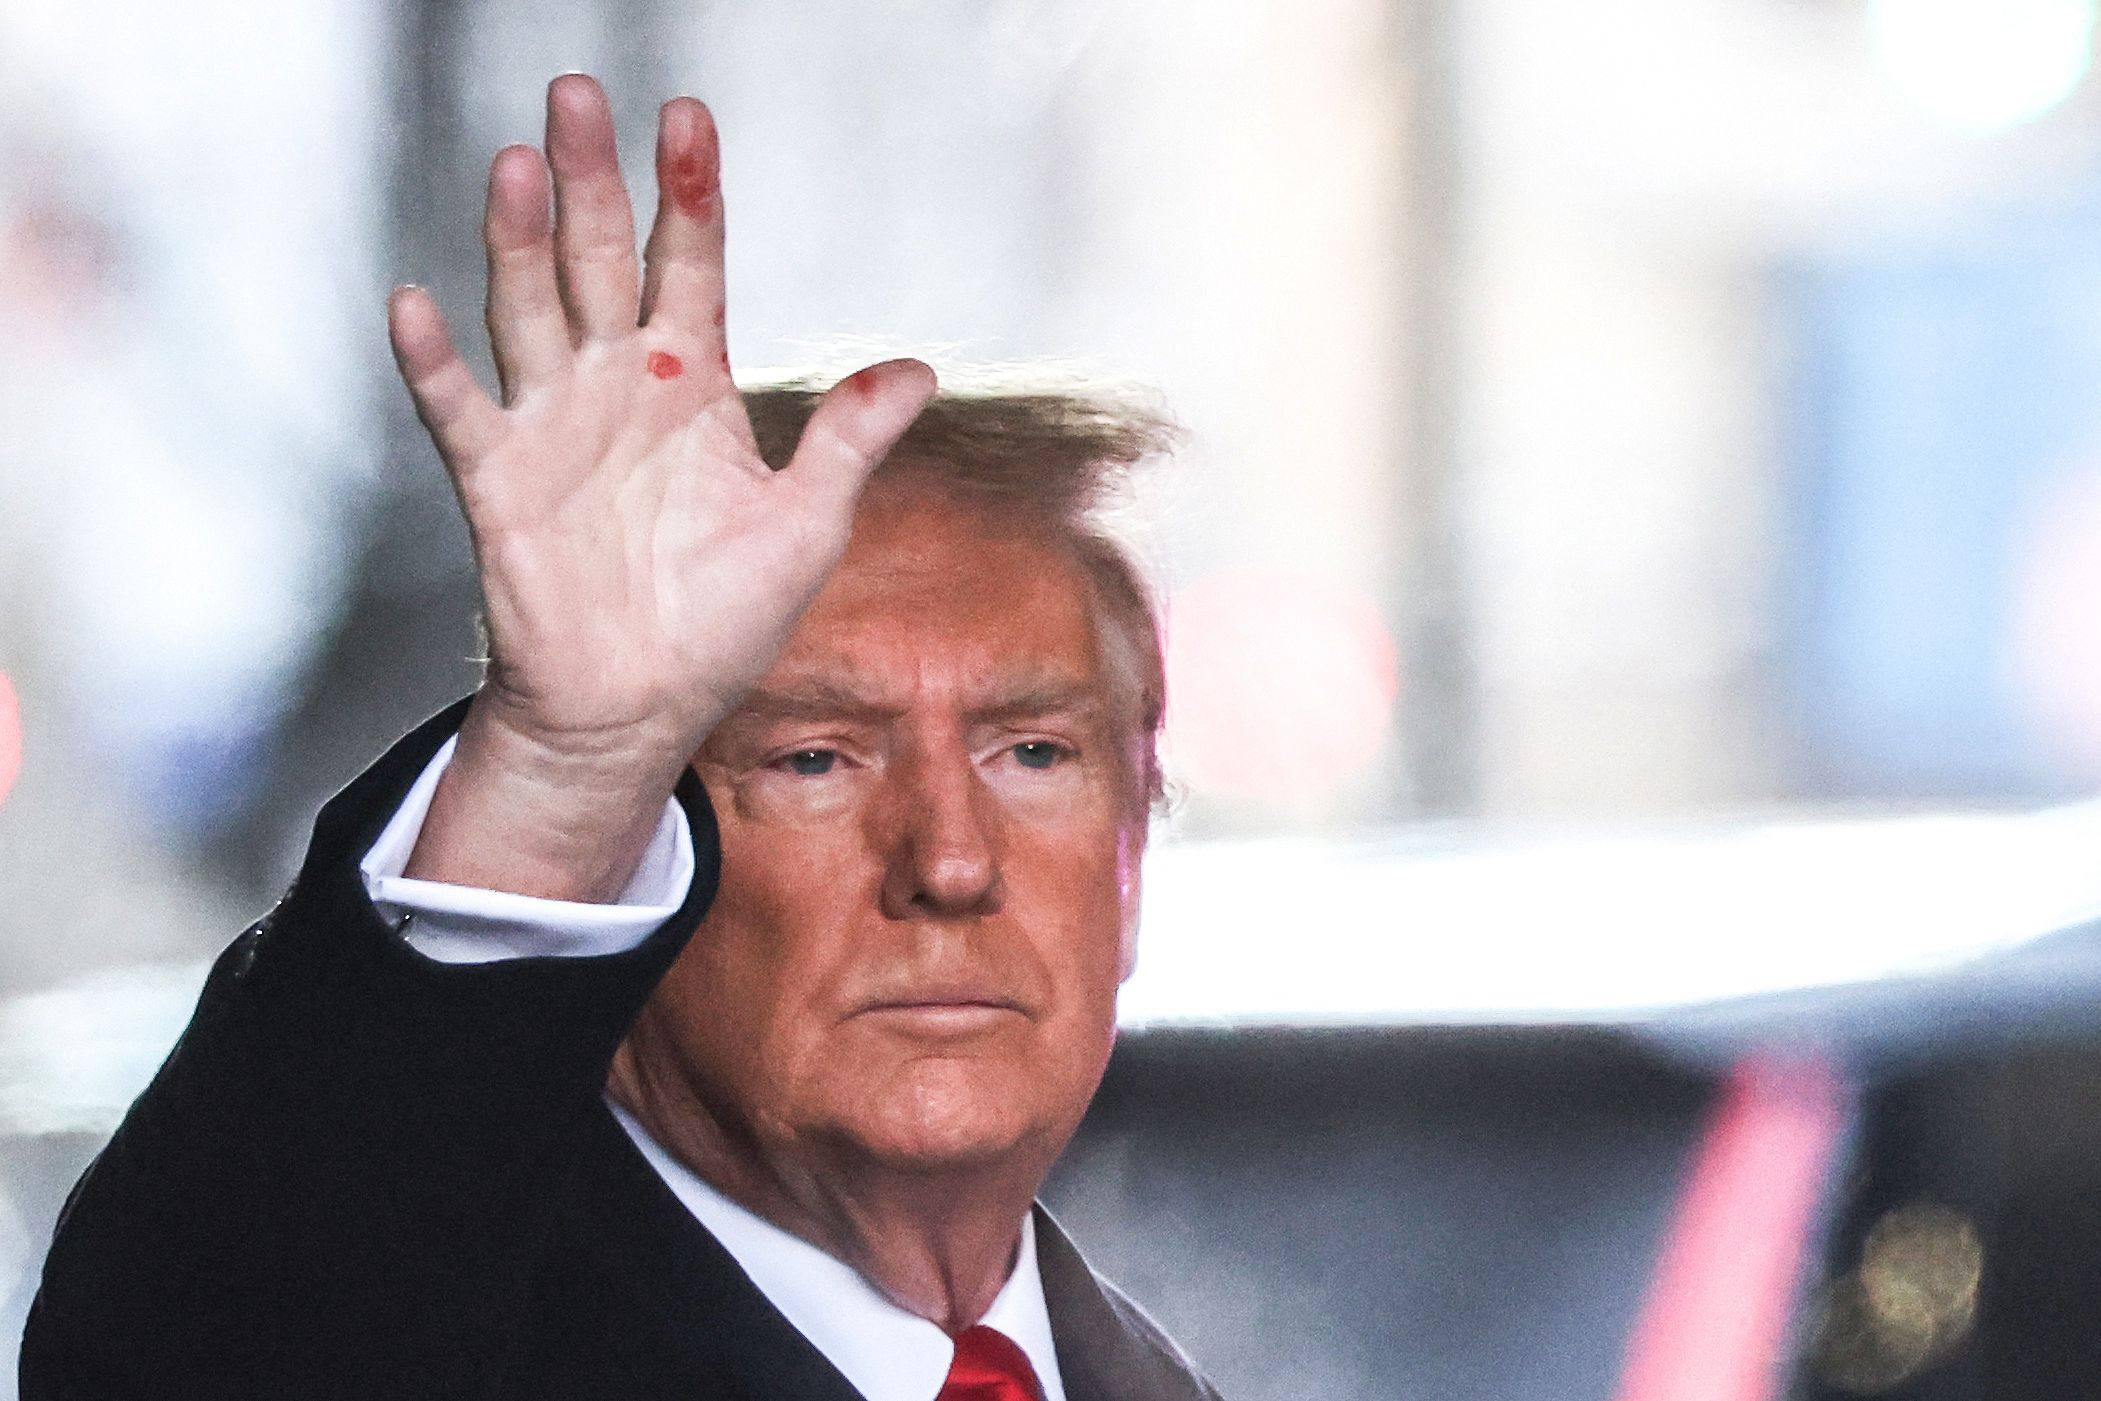 Donald Trump waves to the crowd outside Trump Tower on Tuesday. Red marks are clearly visible on his hand. Photo: AFP